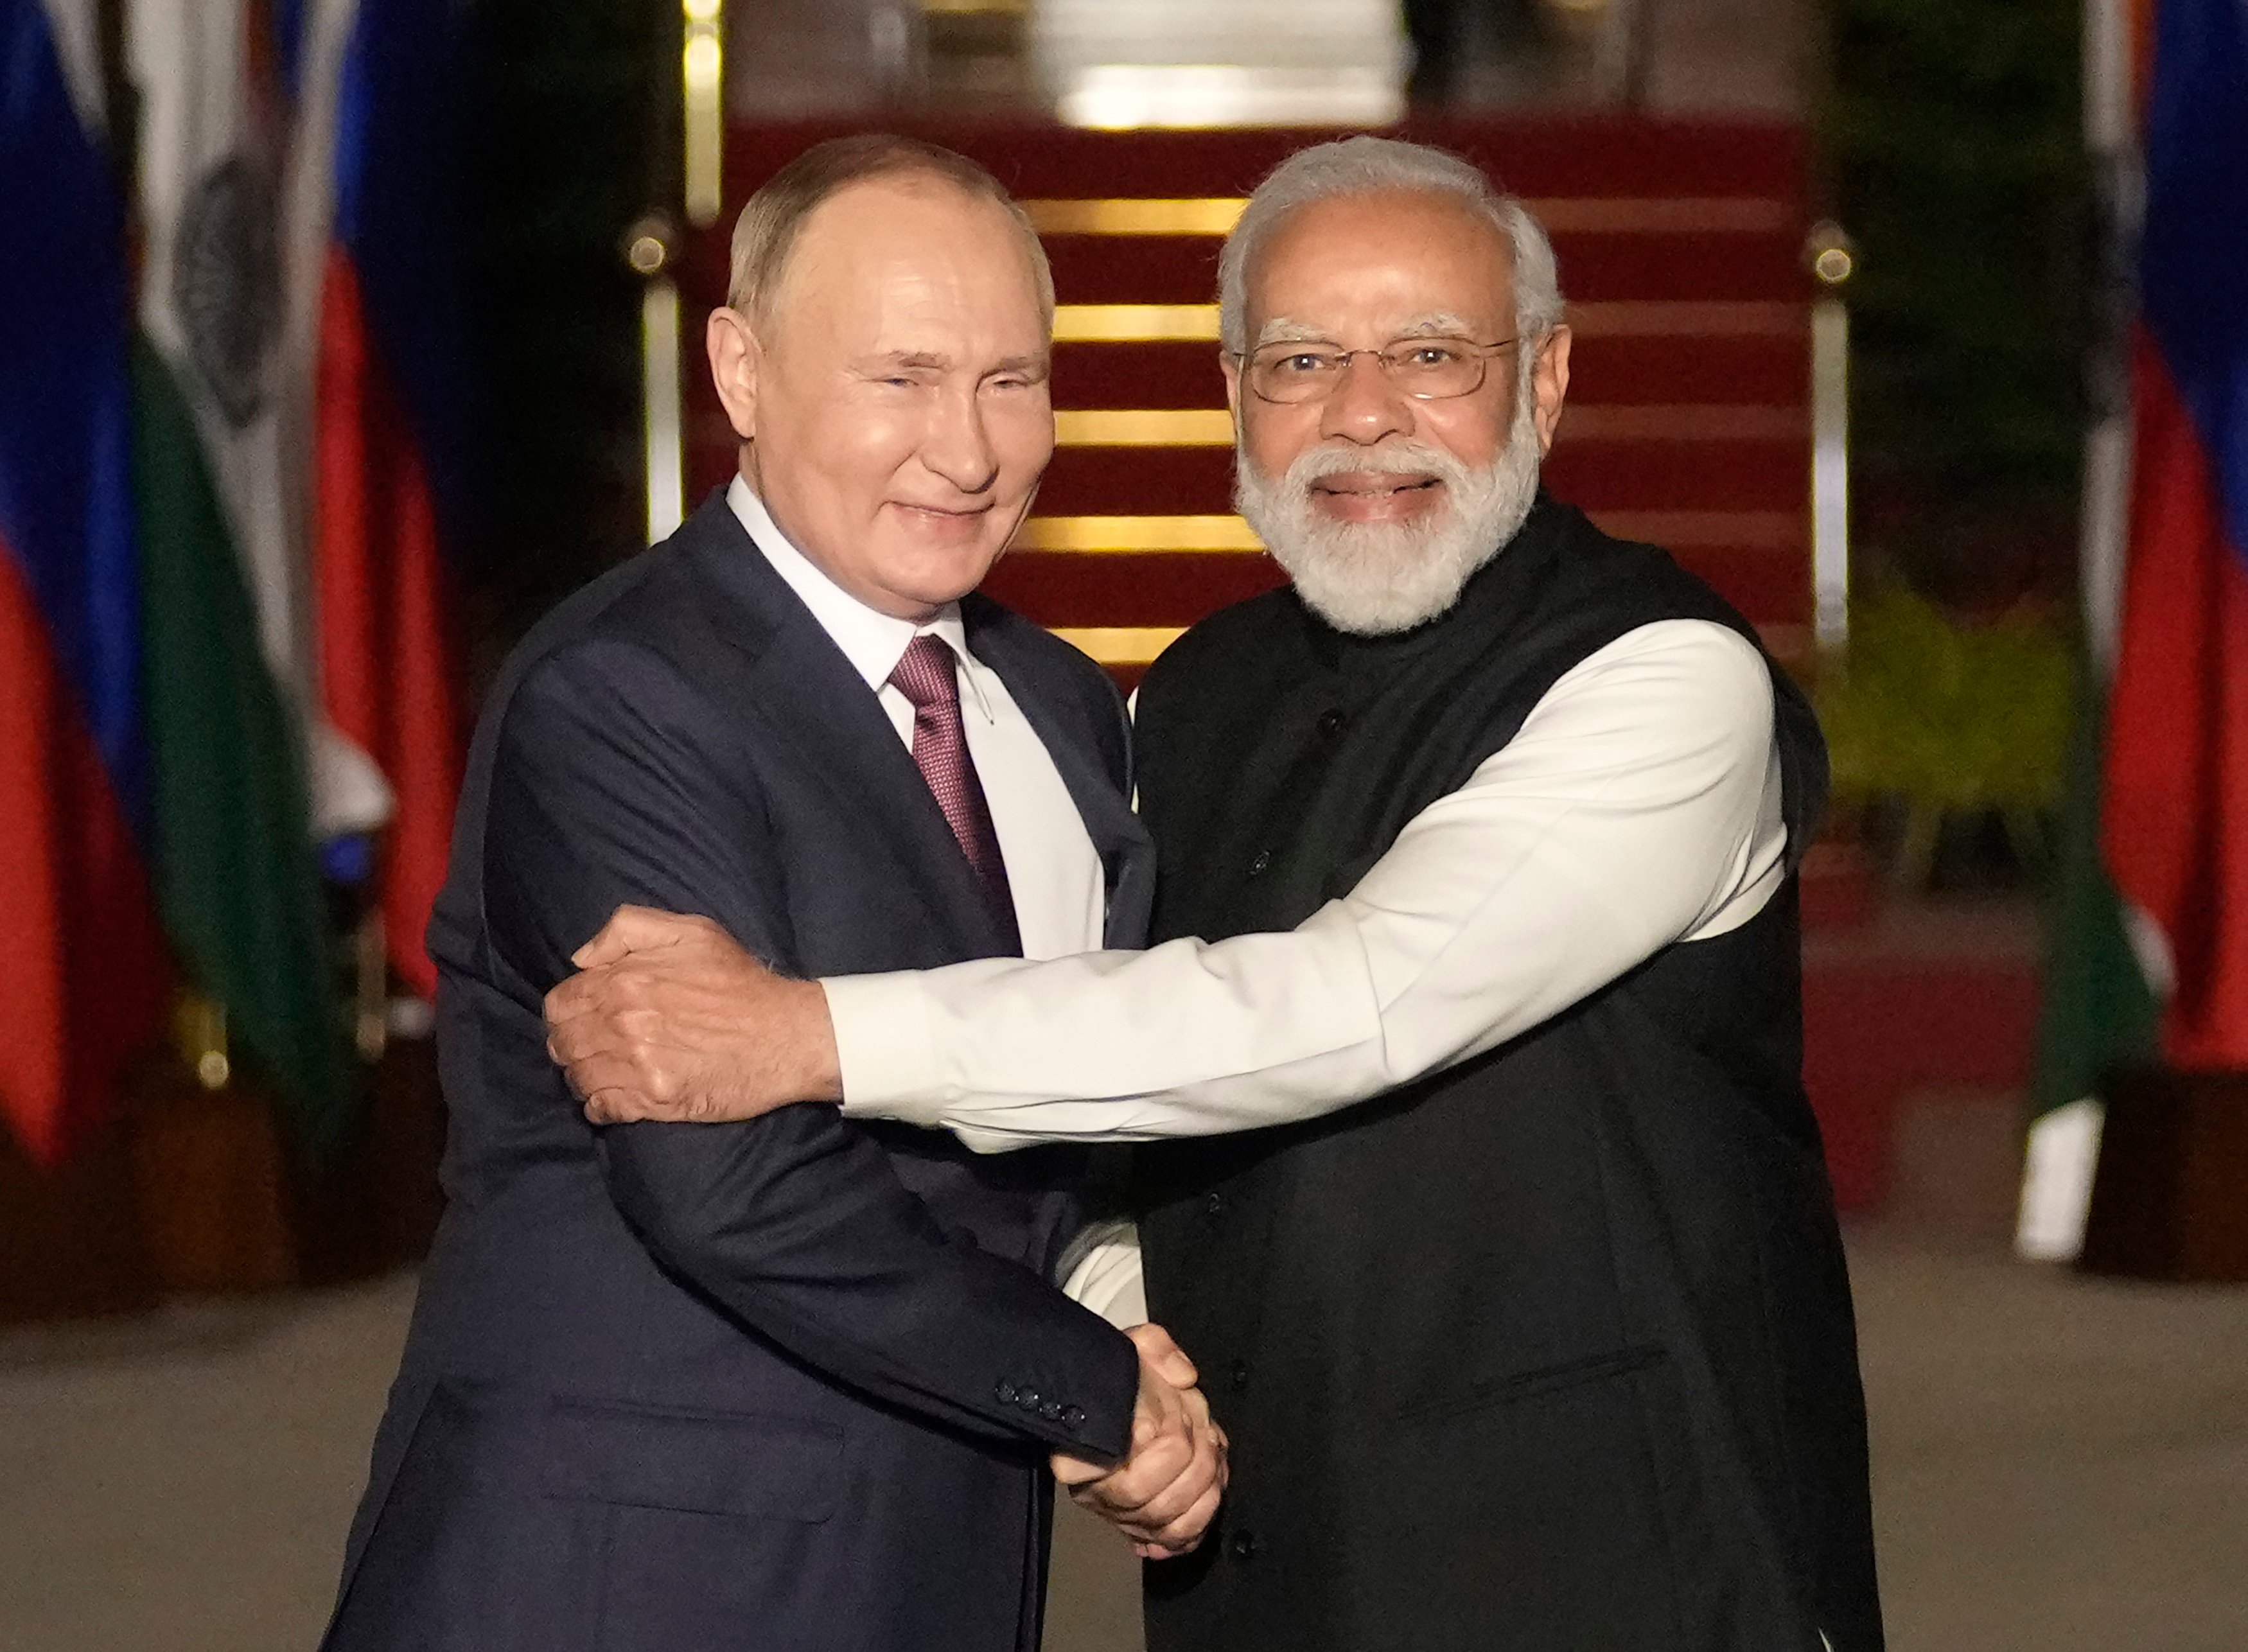 Indian Prime Minister Narendra Modi greets Russian President Vladimir Putin before their meeting in New Delhi in December 2021, after Russia’s invasion of Ukraine. Photo: AP